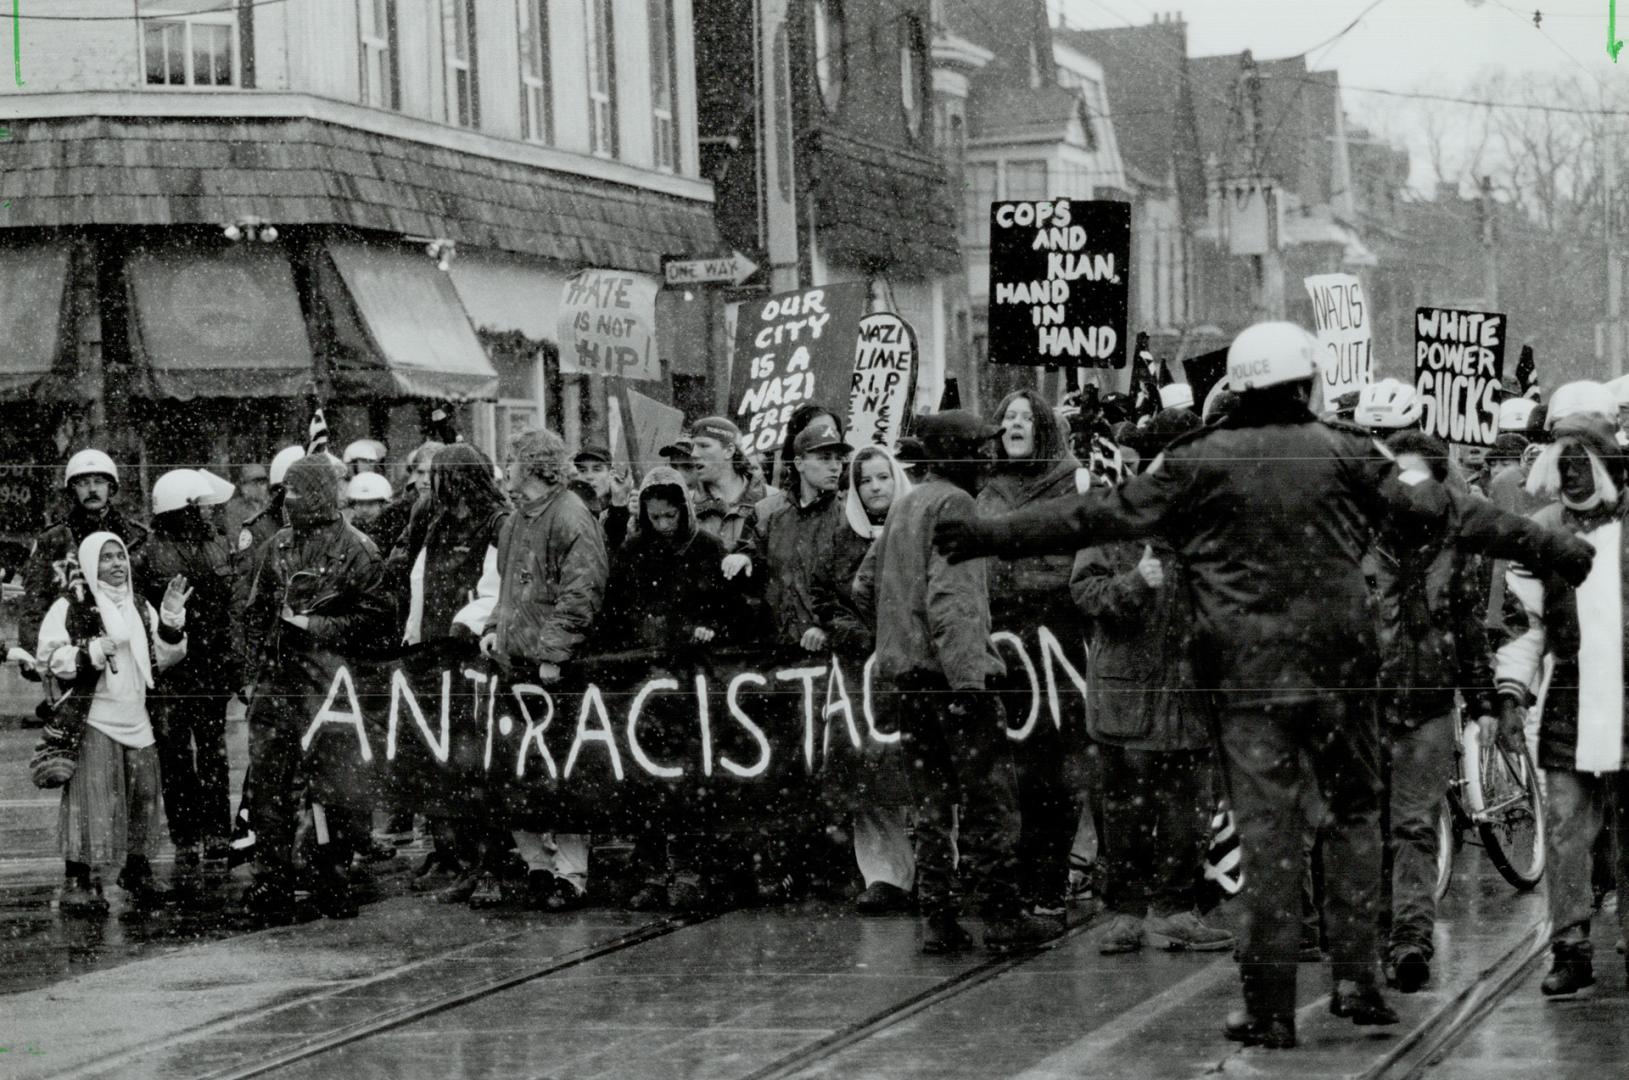 Protest by anti-racist demonstrators